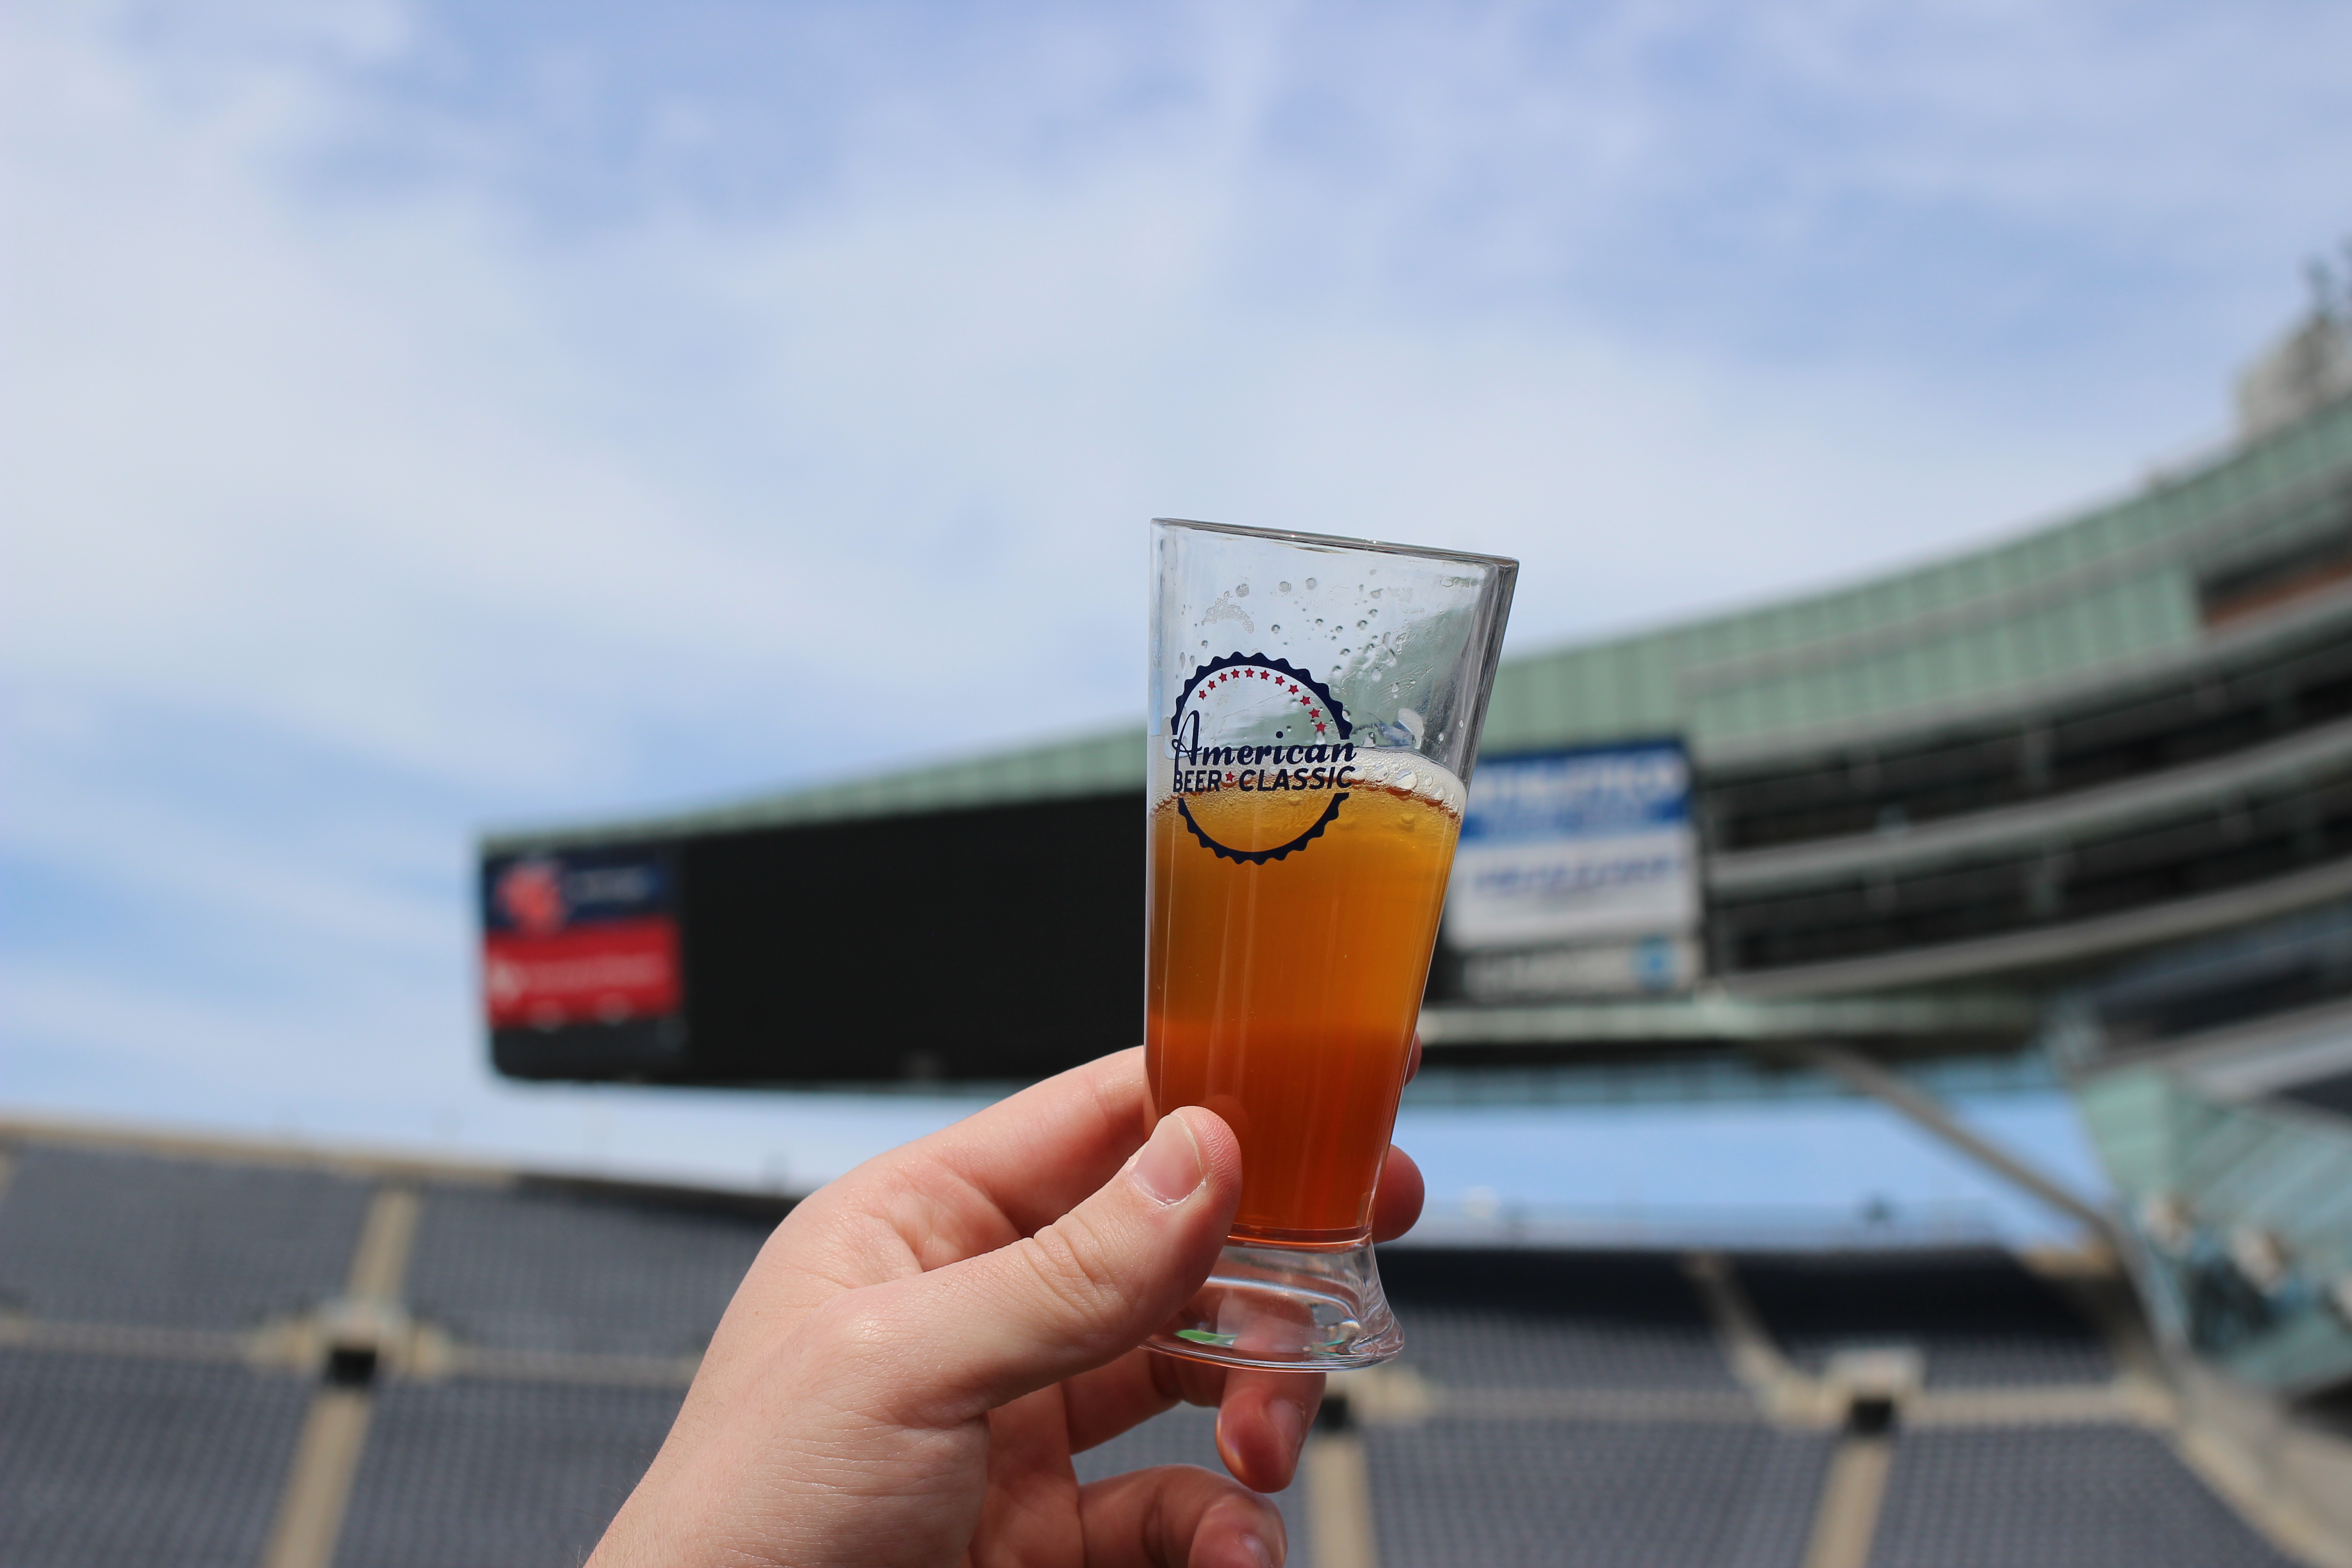 A Look Back at the 2014 American Beer Classic